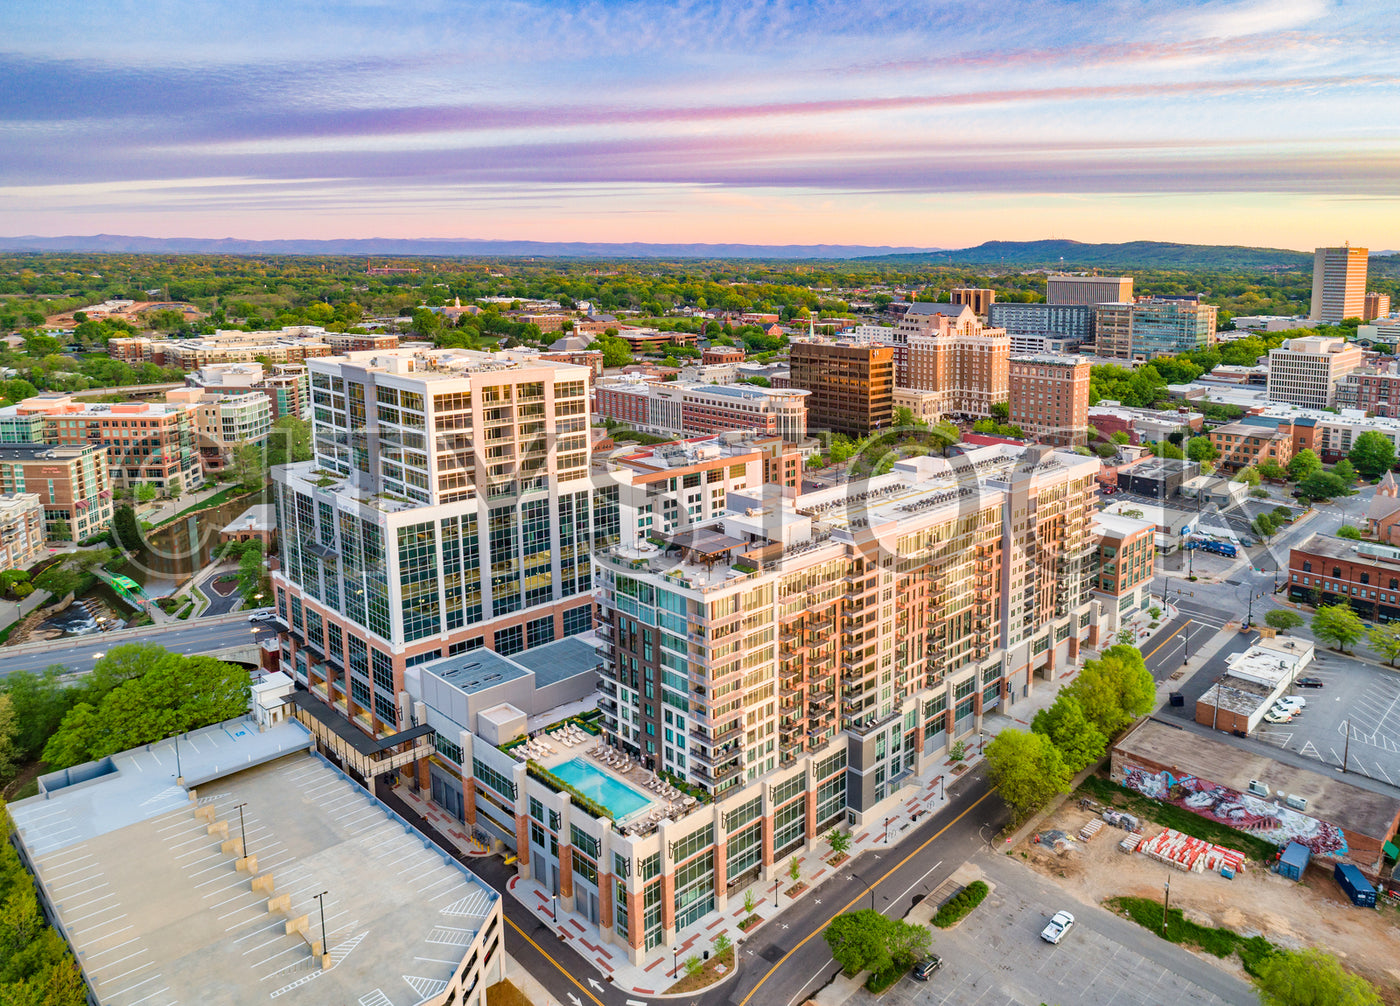 Aerial view of modern Greenville, SC at sunset with mountains